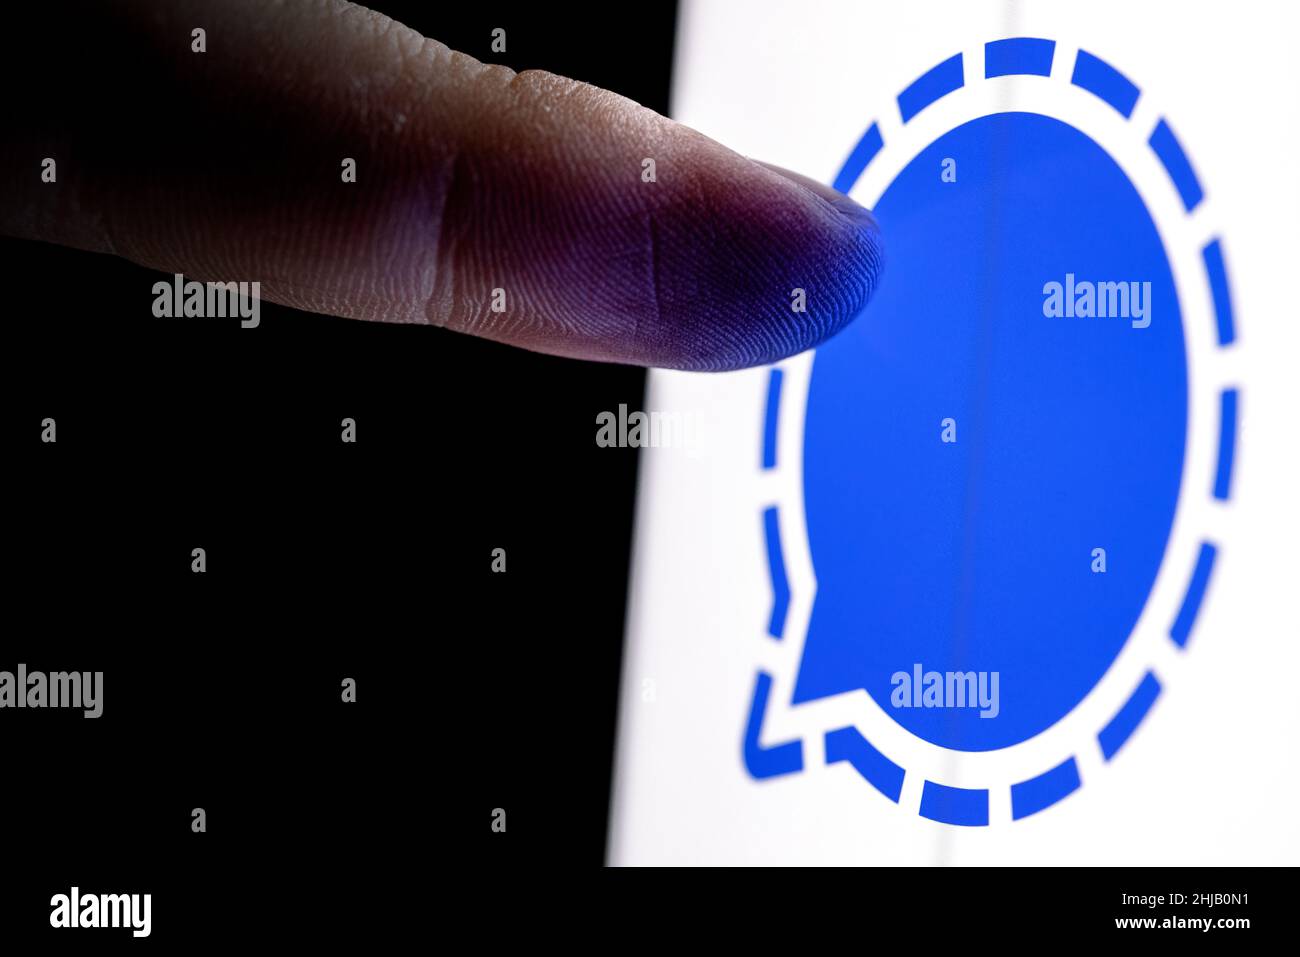 The finger reaches for the Signal encrypted instant messaging service logo on the smartphone screen. Stock Photo